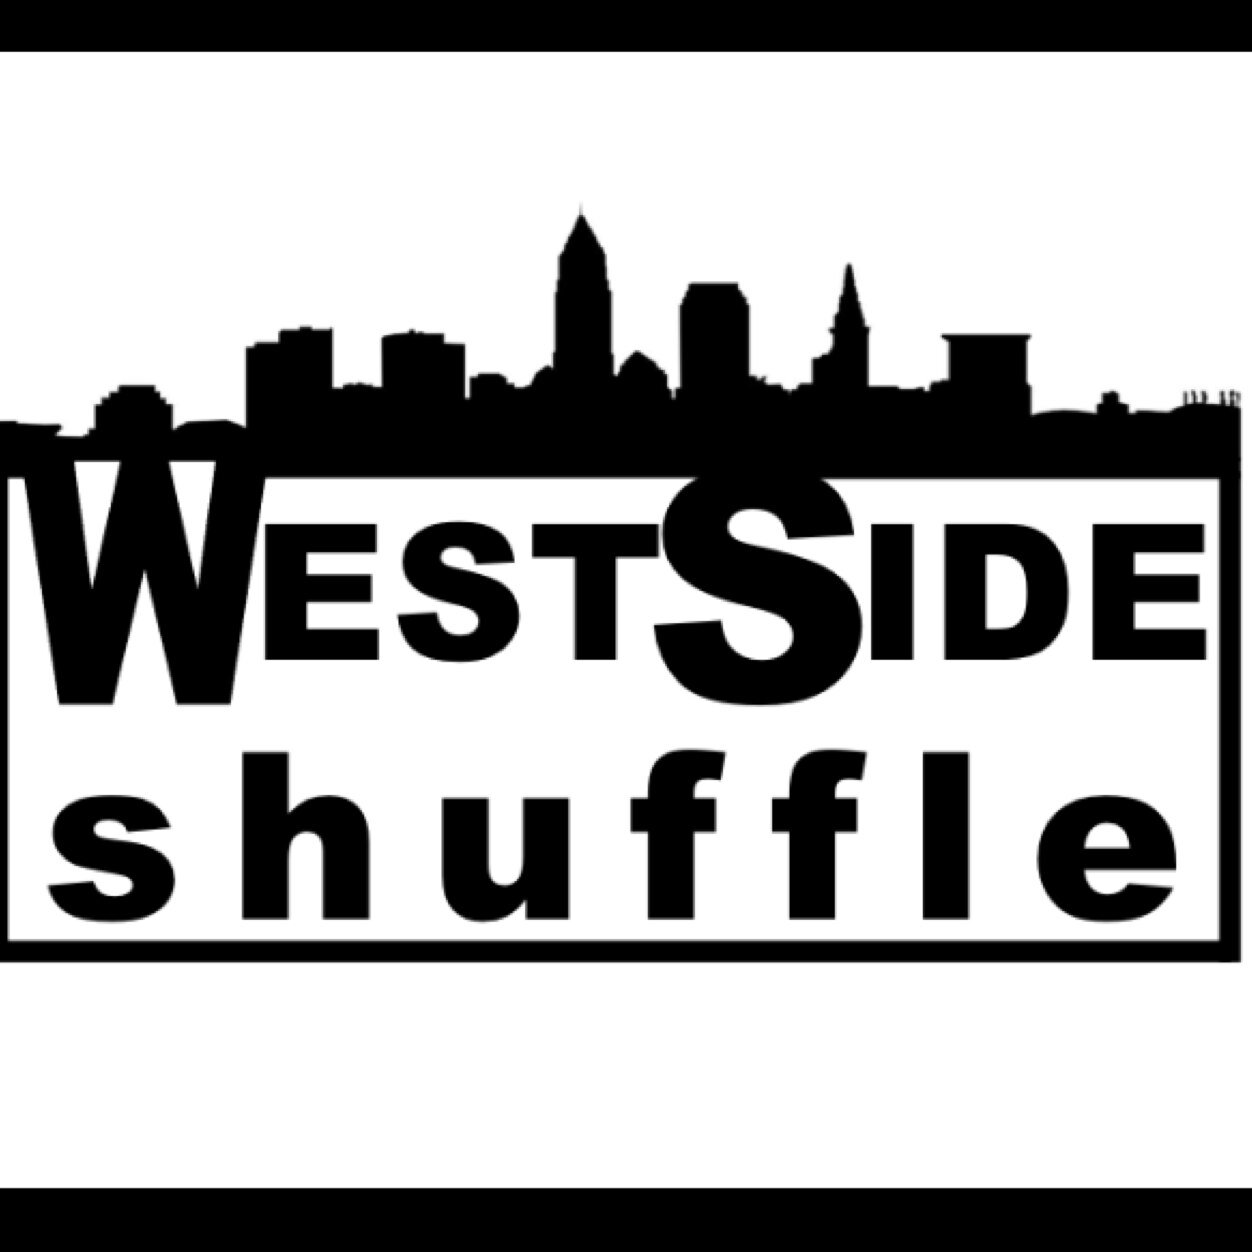 The West Side Shuffle is a shuttle bus, transporting people to bars and restaurants throughout the west side of Cleveland Friday and Saturday nights.